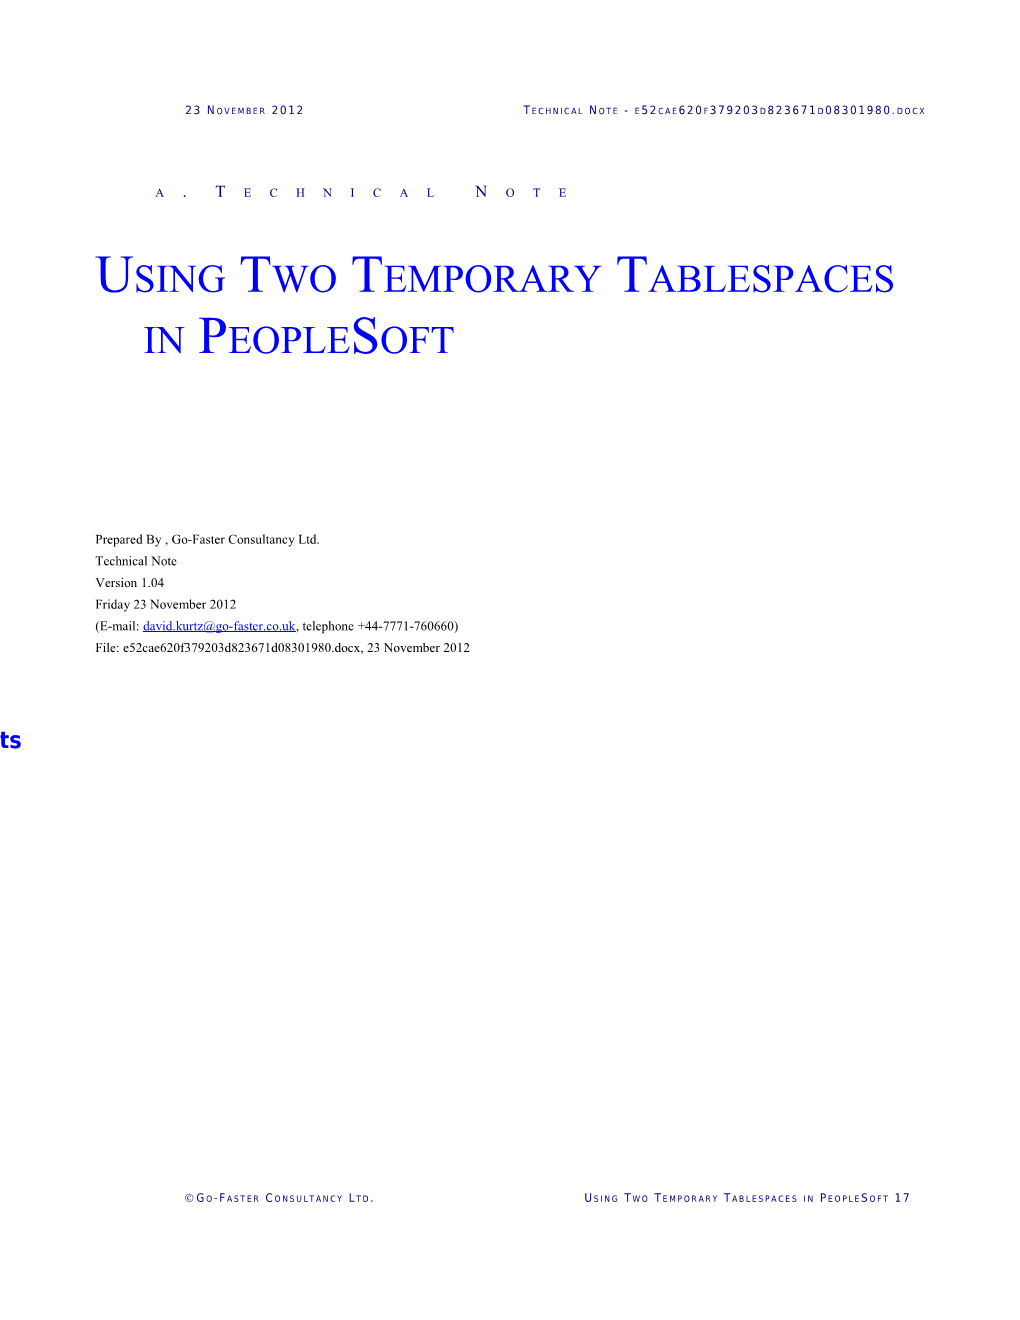 Usingtwotemporarytablespaces in Peoplesoft